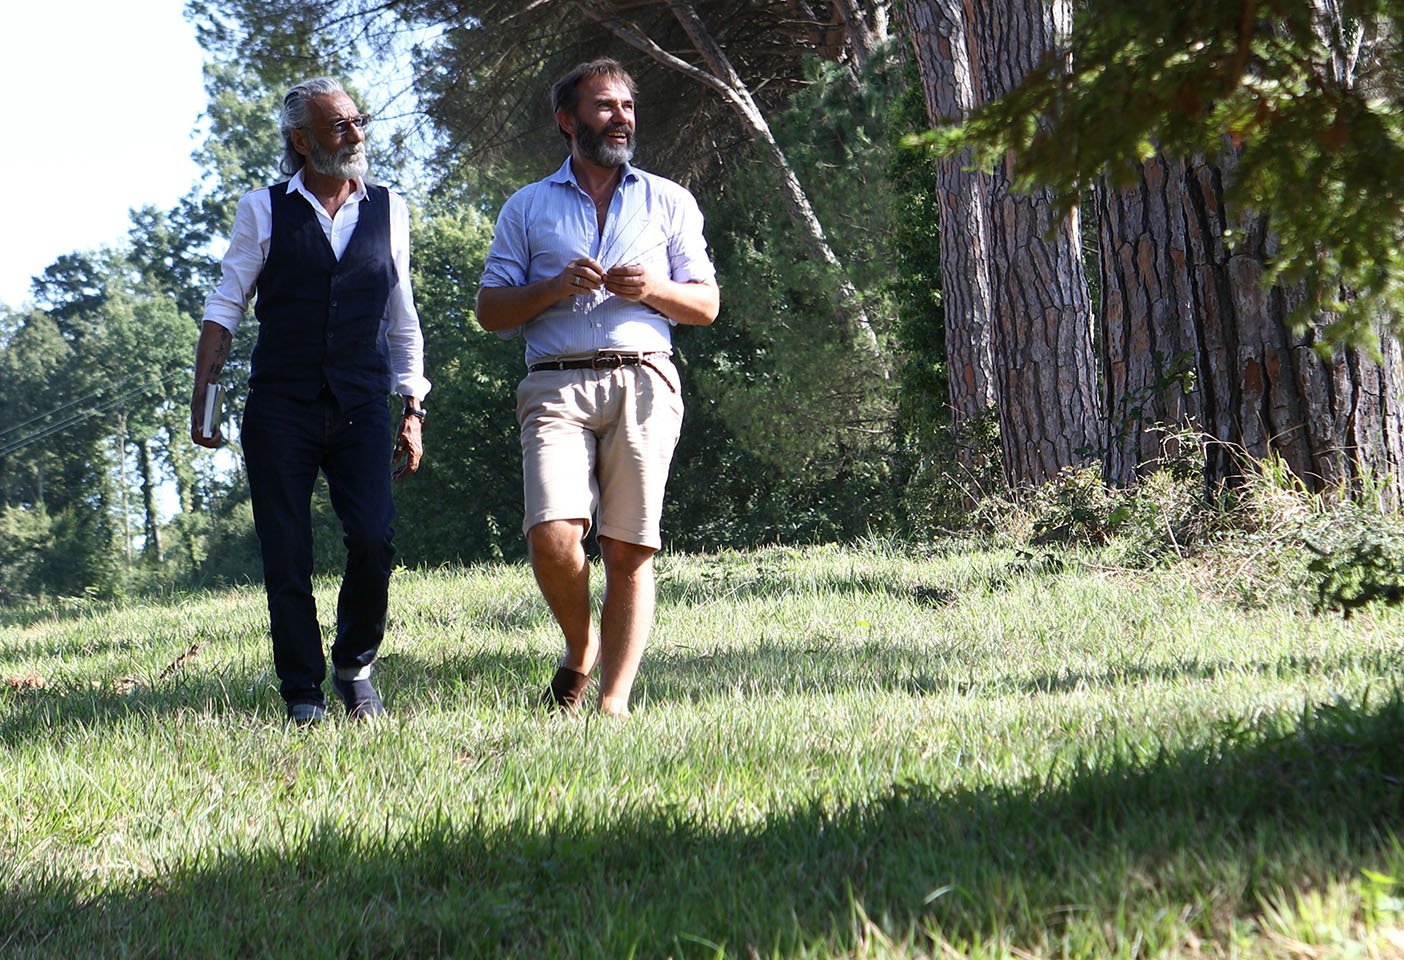 Massimo Monini and Jean-Christophe Clair in Umbertide, where Rometti and the ceramics they create have a deep contection to the people and natural landscape of Umbria. Photography © Monica Spezia-Livinginside.